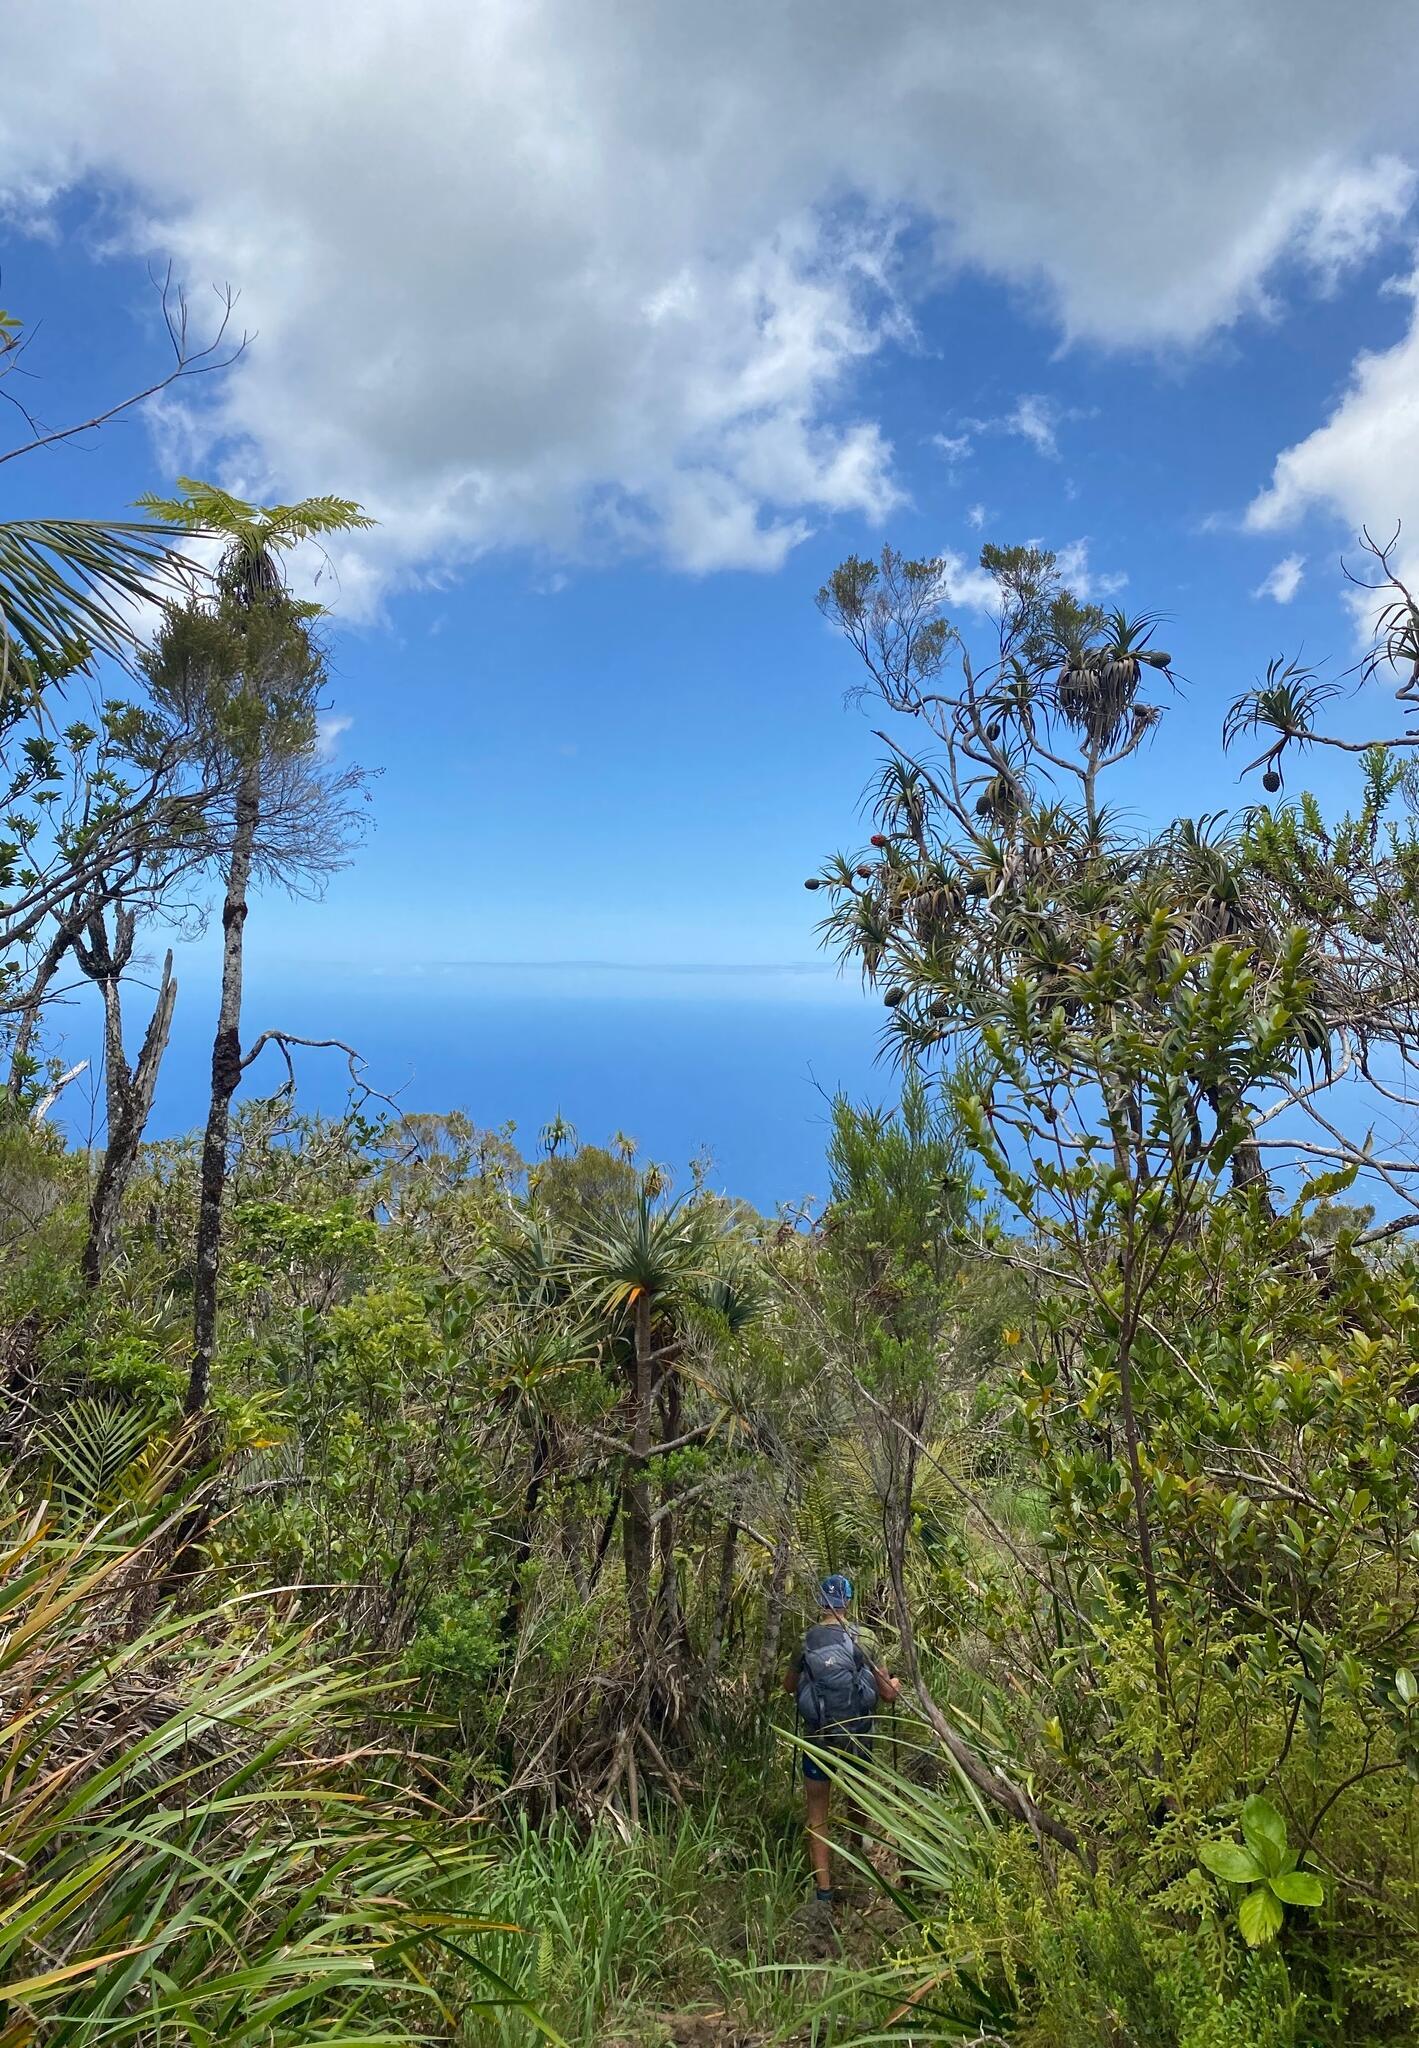 GR R2: the must-do hike in Reunion Island!